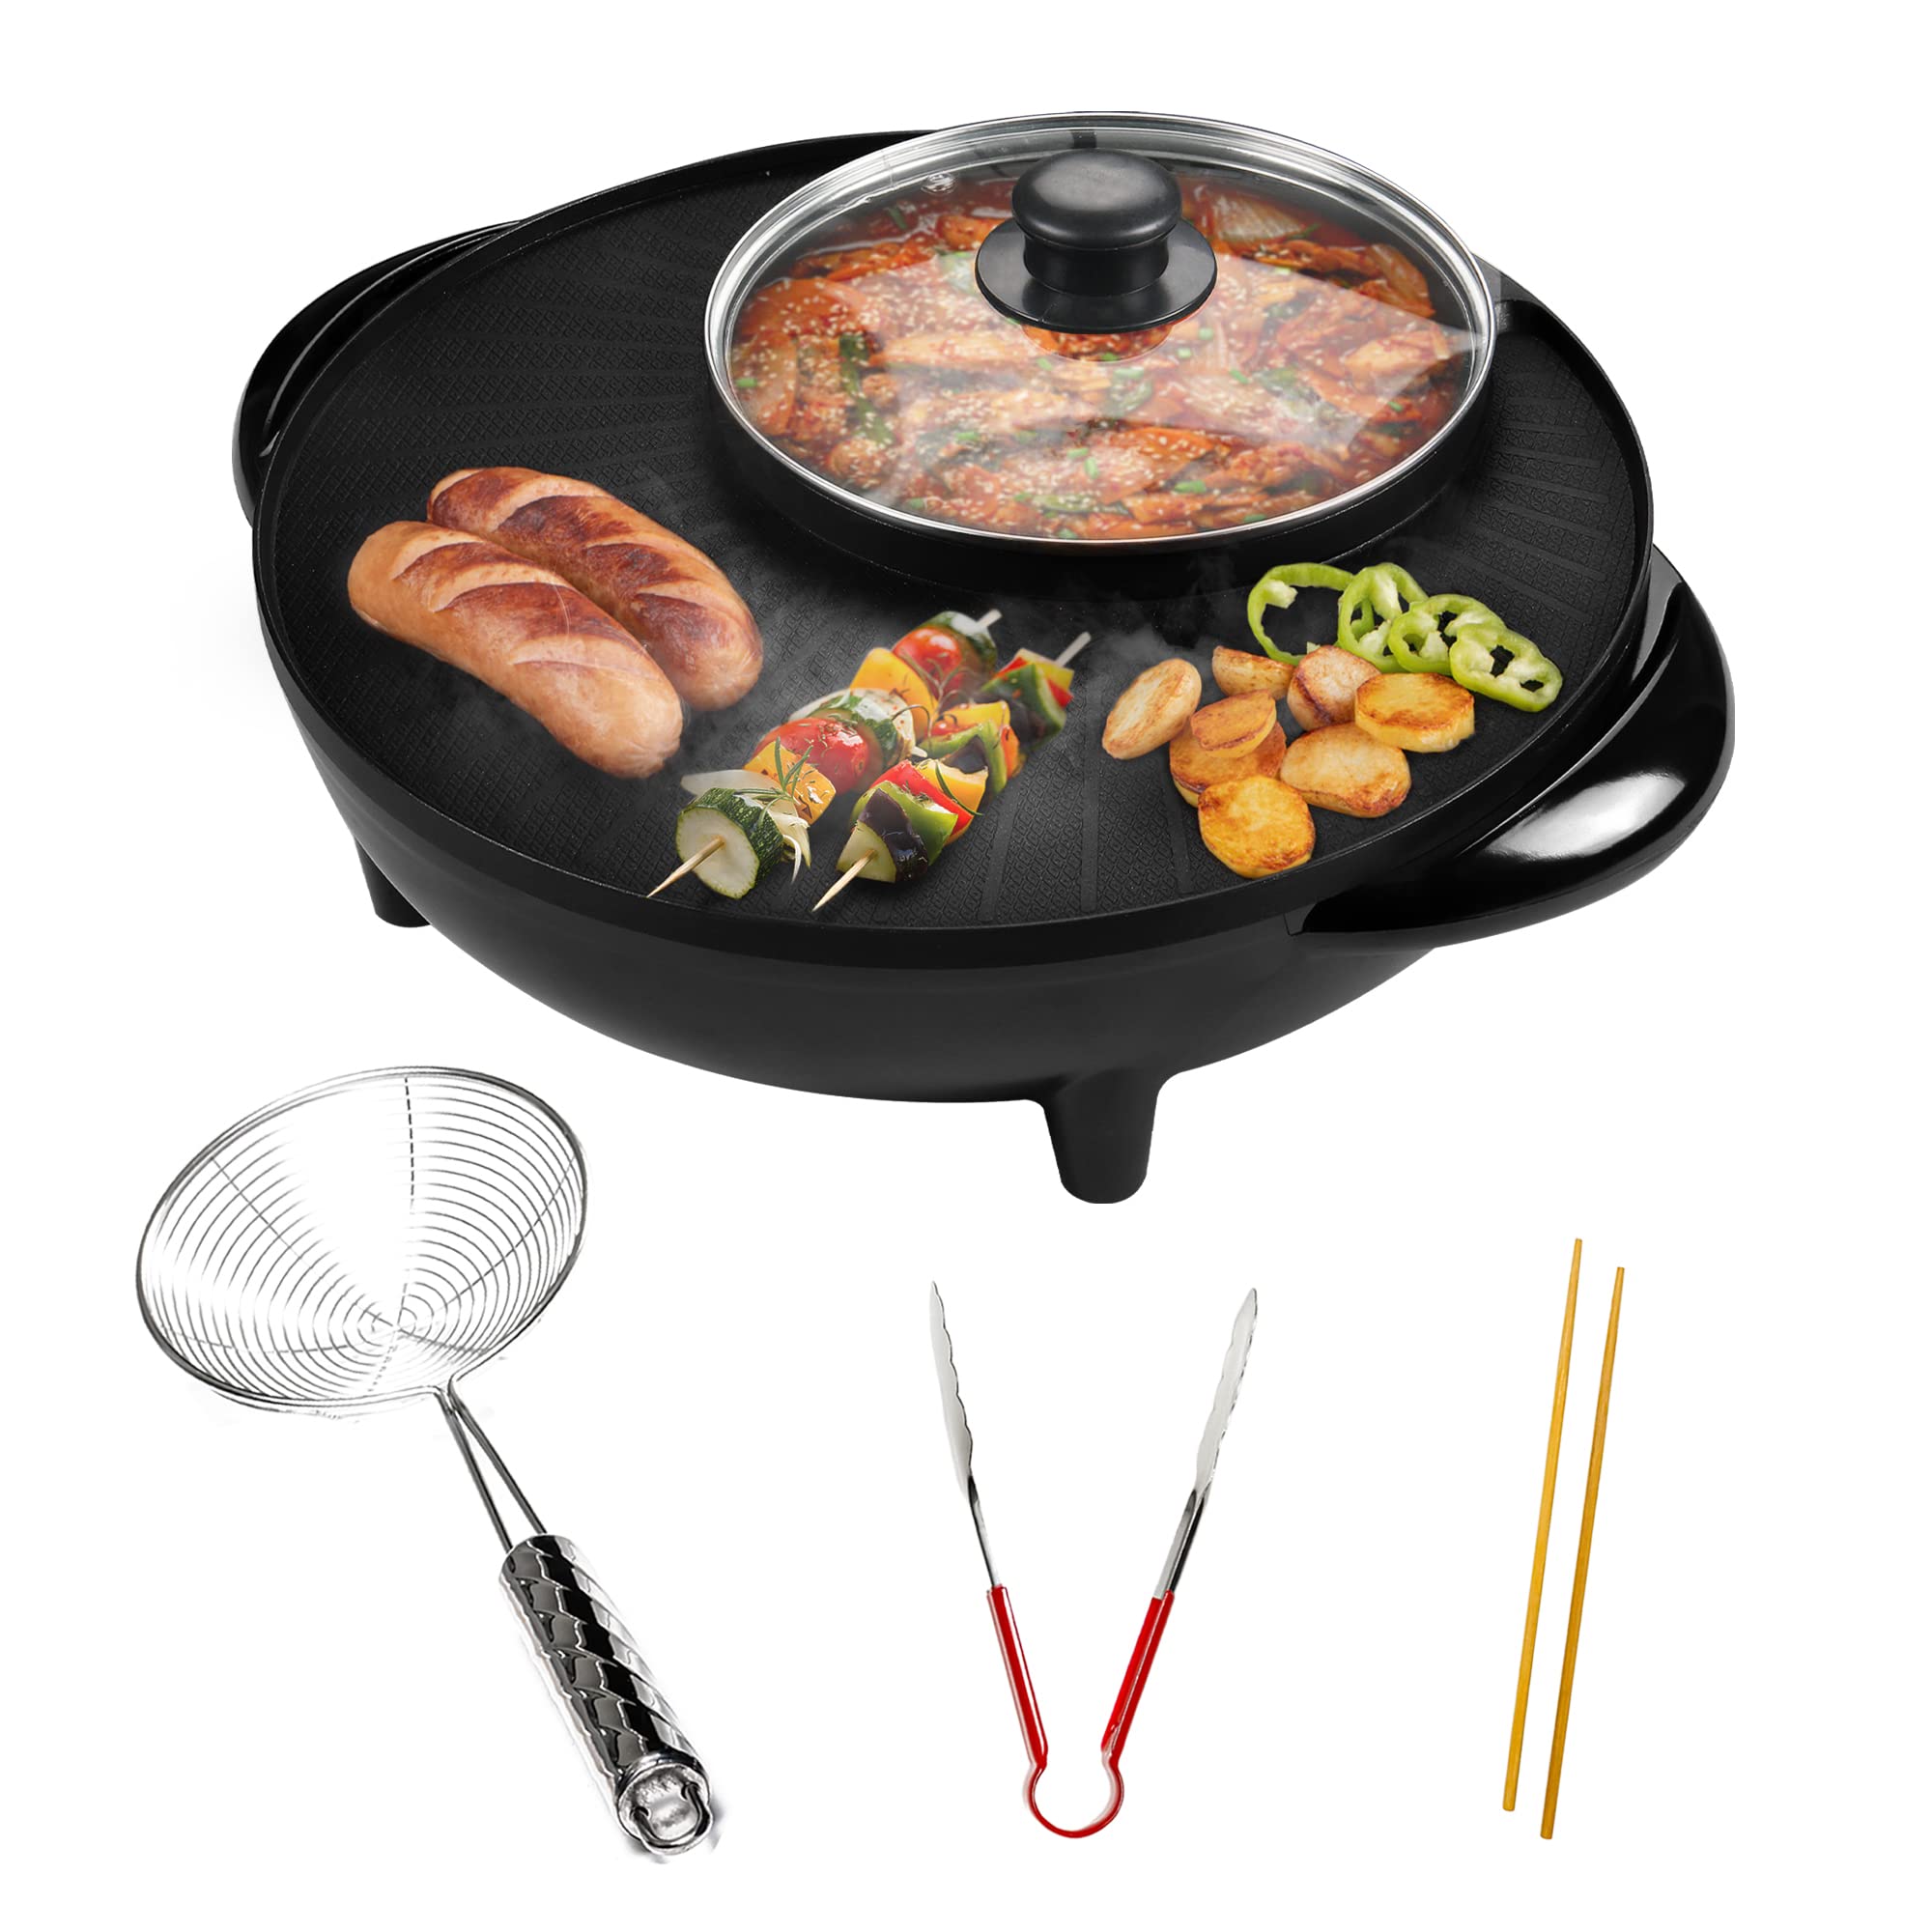 OVENTE Electric Hot Pot and Smokeless Grill, 1200W with Temperature Control Perfect Multi-Cooker for Korean BBQ, Shabu Shabu and Soup, Portable with Free Strainer, Chopsticks and Tong, Black GH10133B